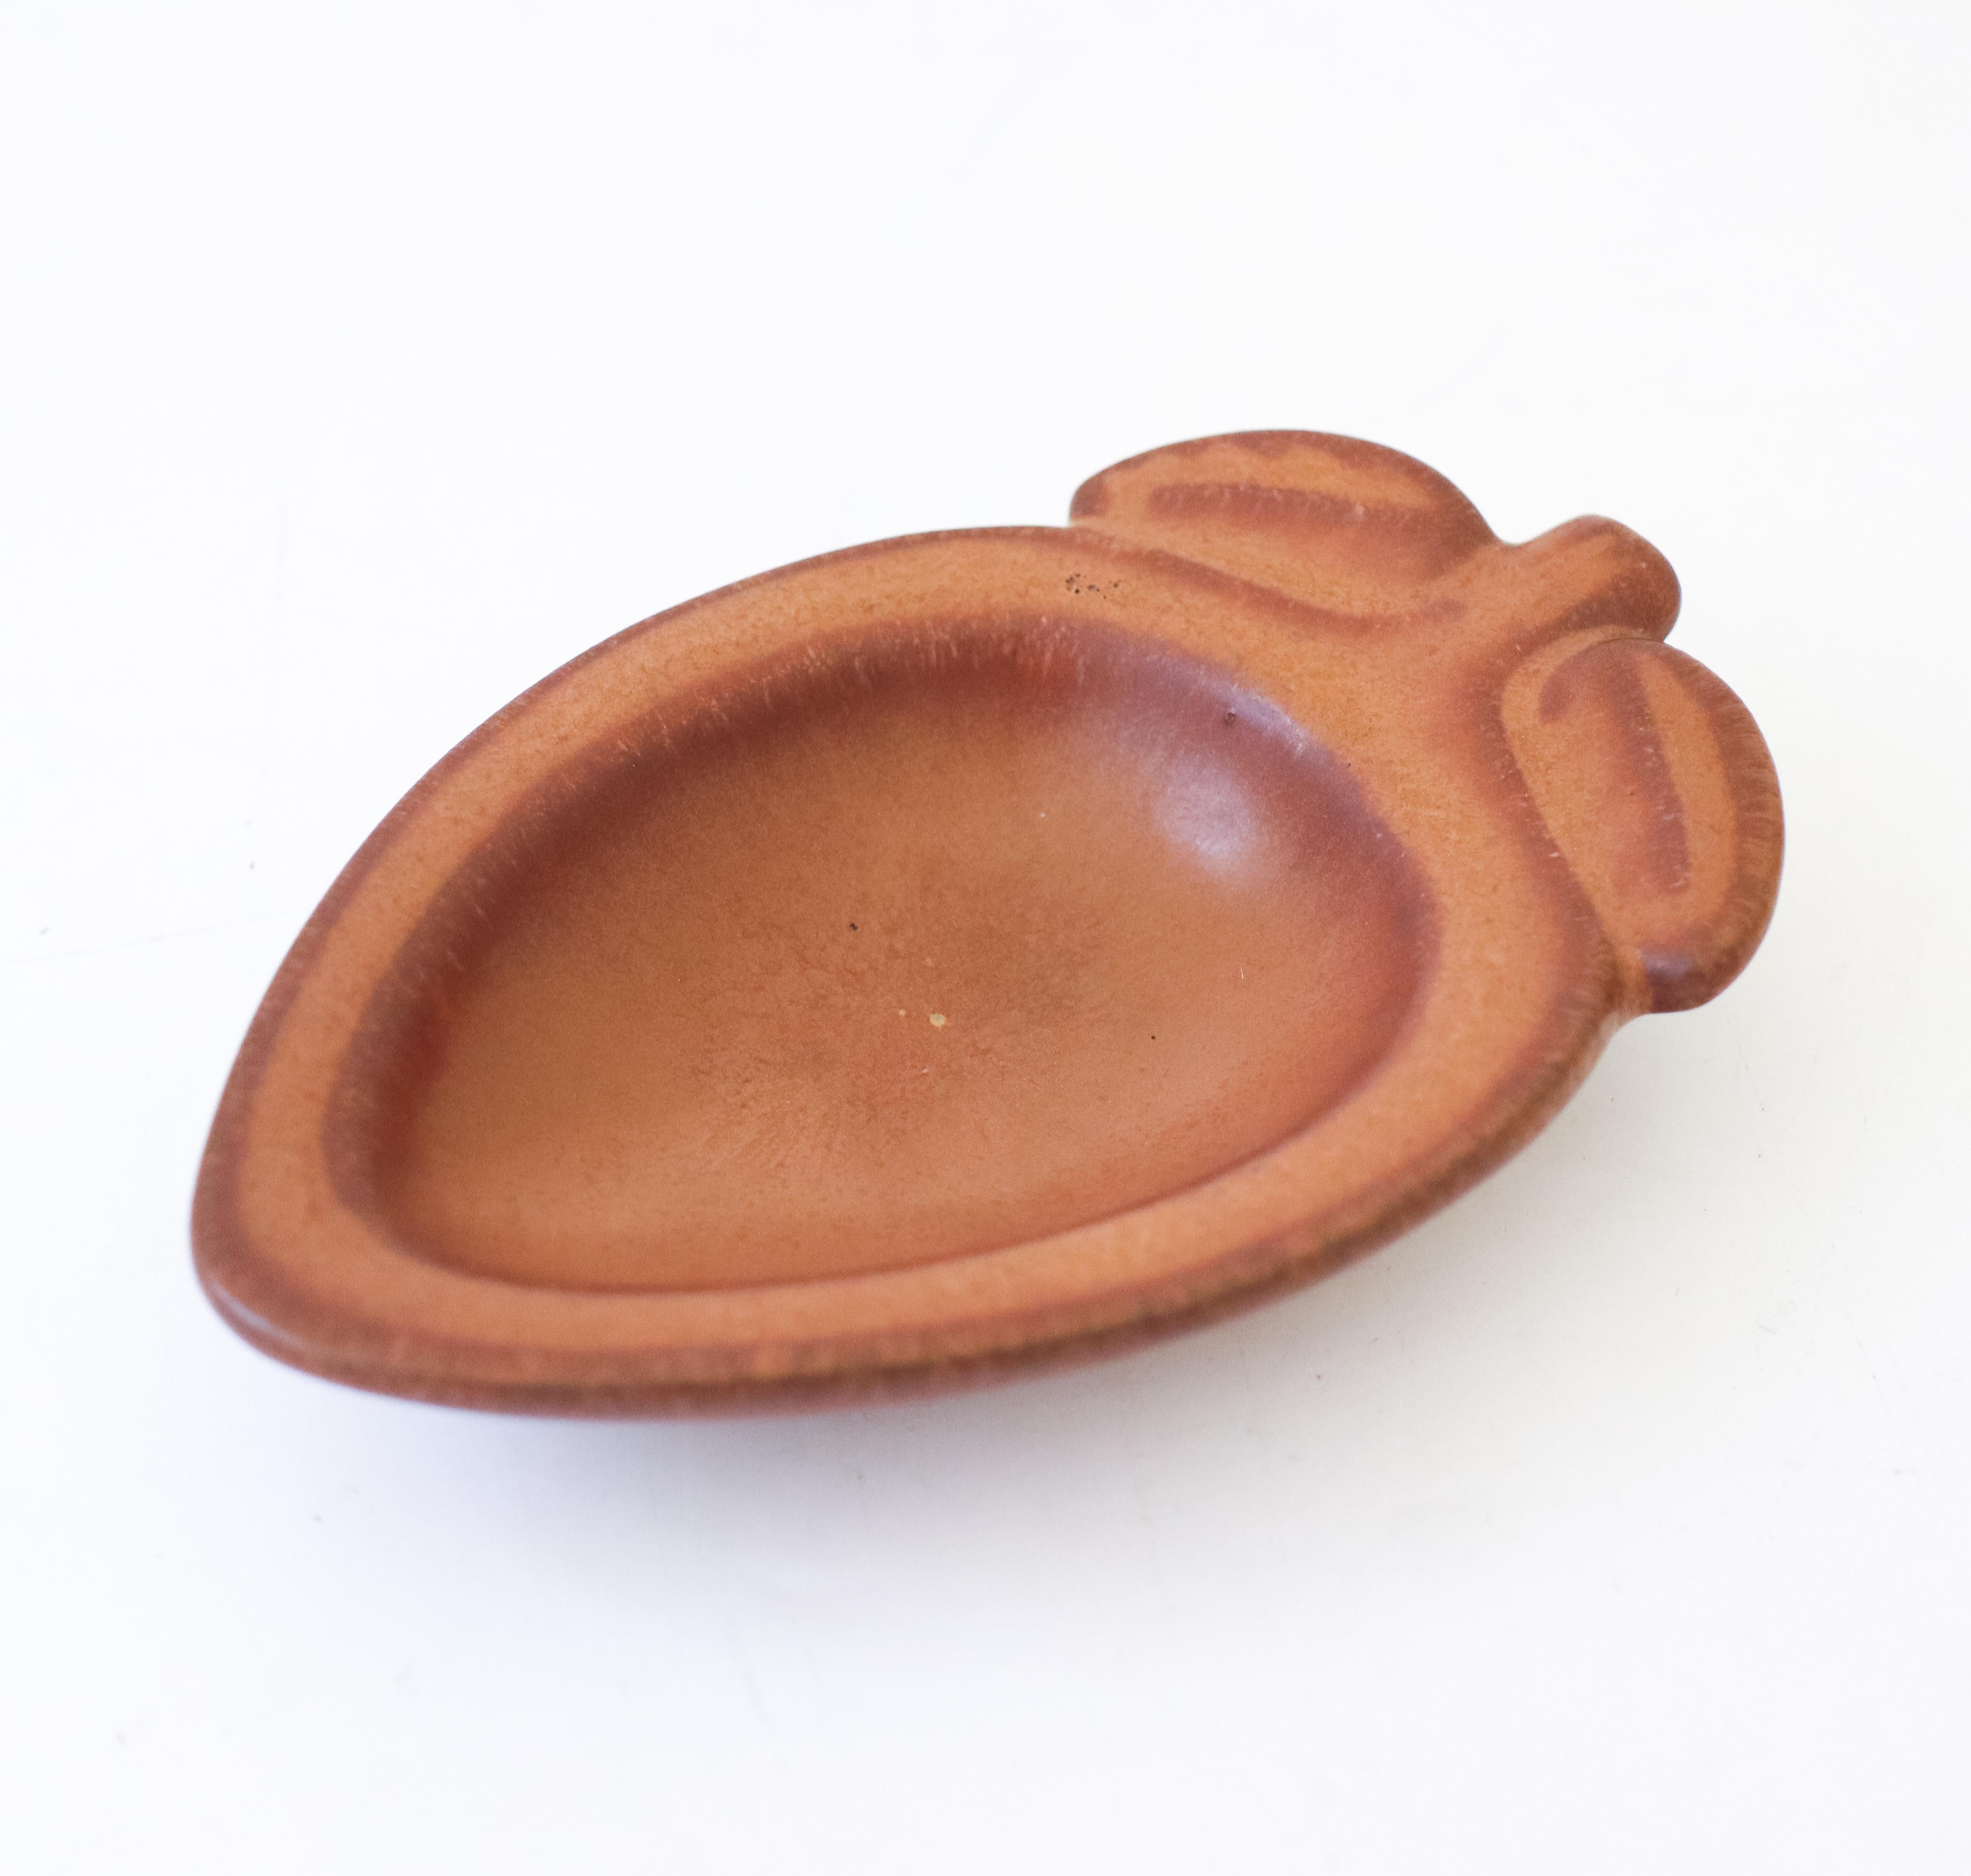 A acorn-shaped brown bowl designed by Gunnar Nylund at Rörstrand, it´s 13,5 x 8,5 cm in diameter. It´s in very good condition except from some minor marks. It is marked as 2nd quality. 

Gunnar Nylund was born in Paris 1904 with parents who worked